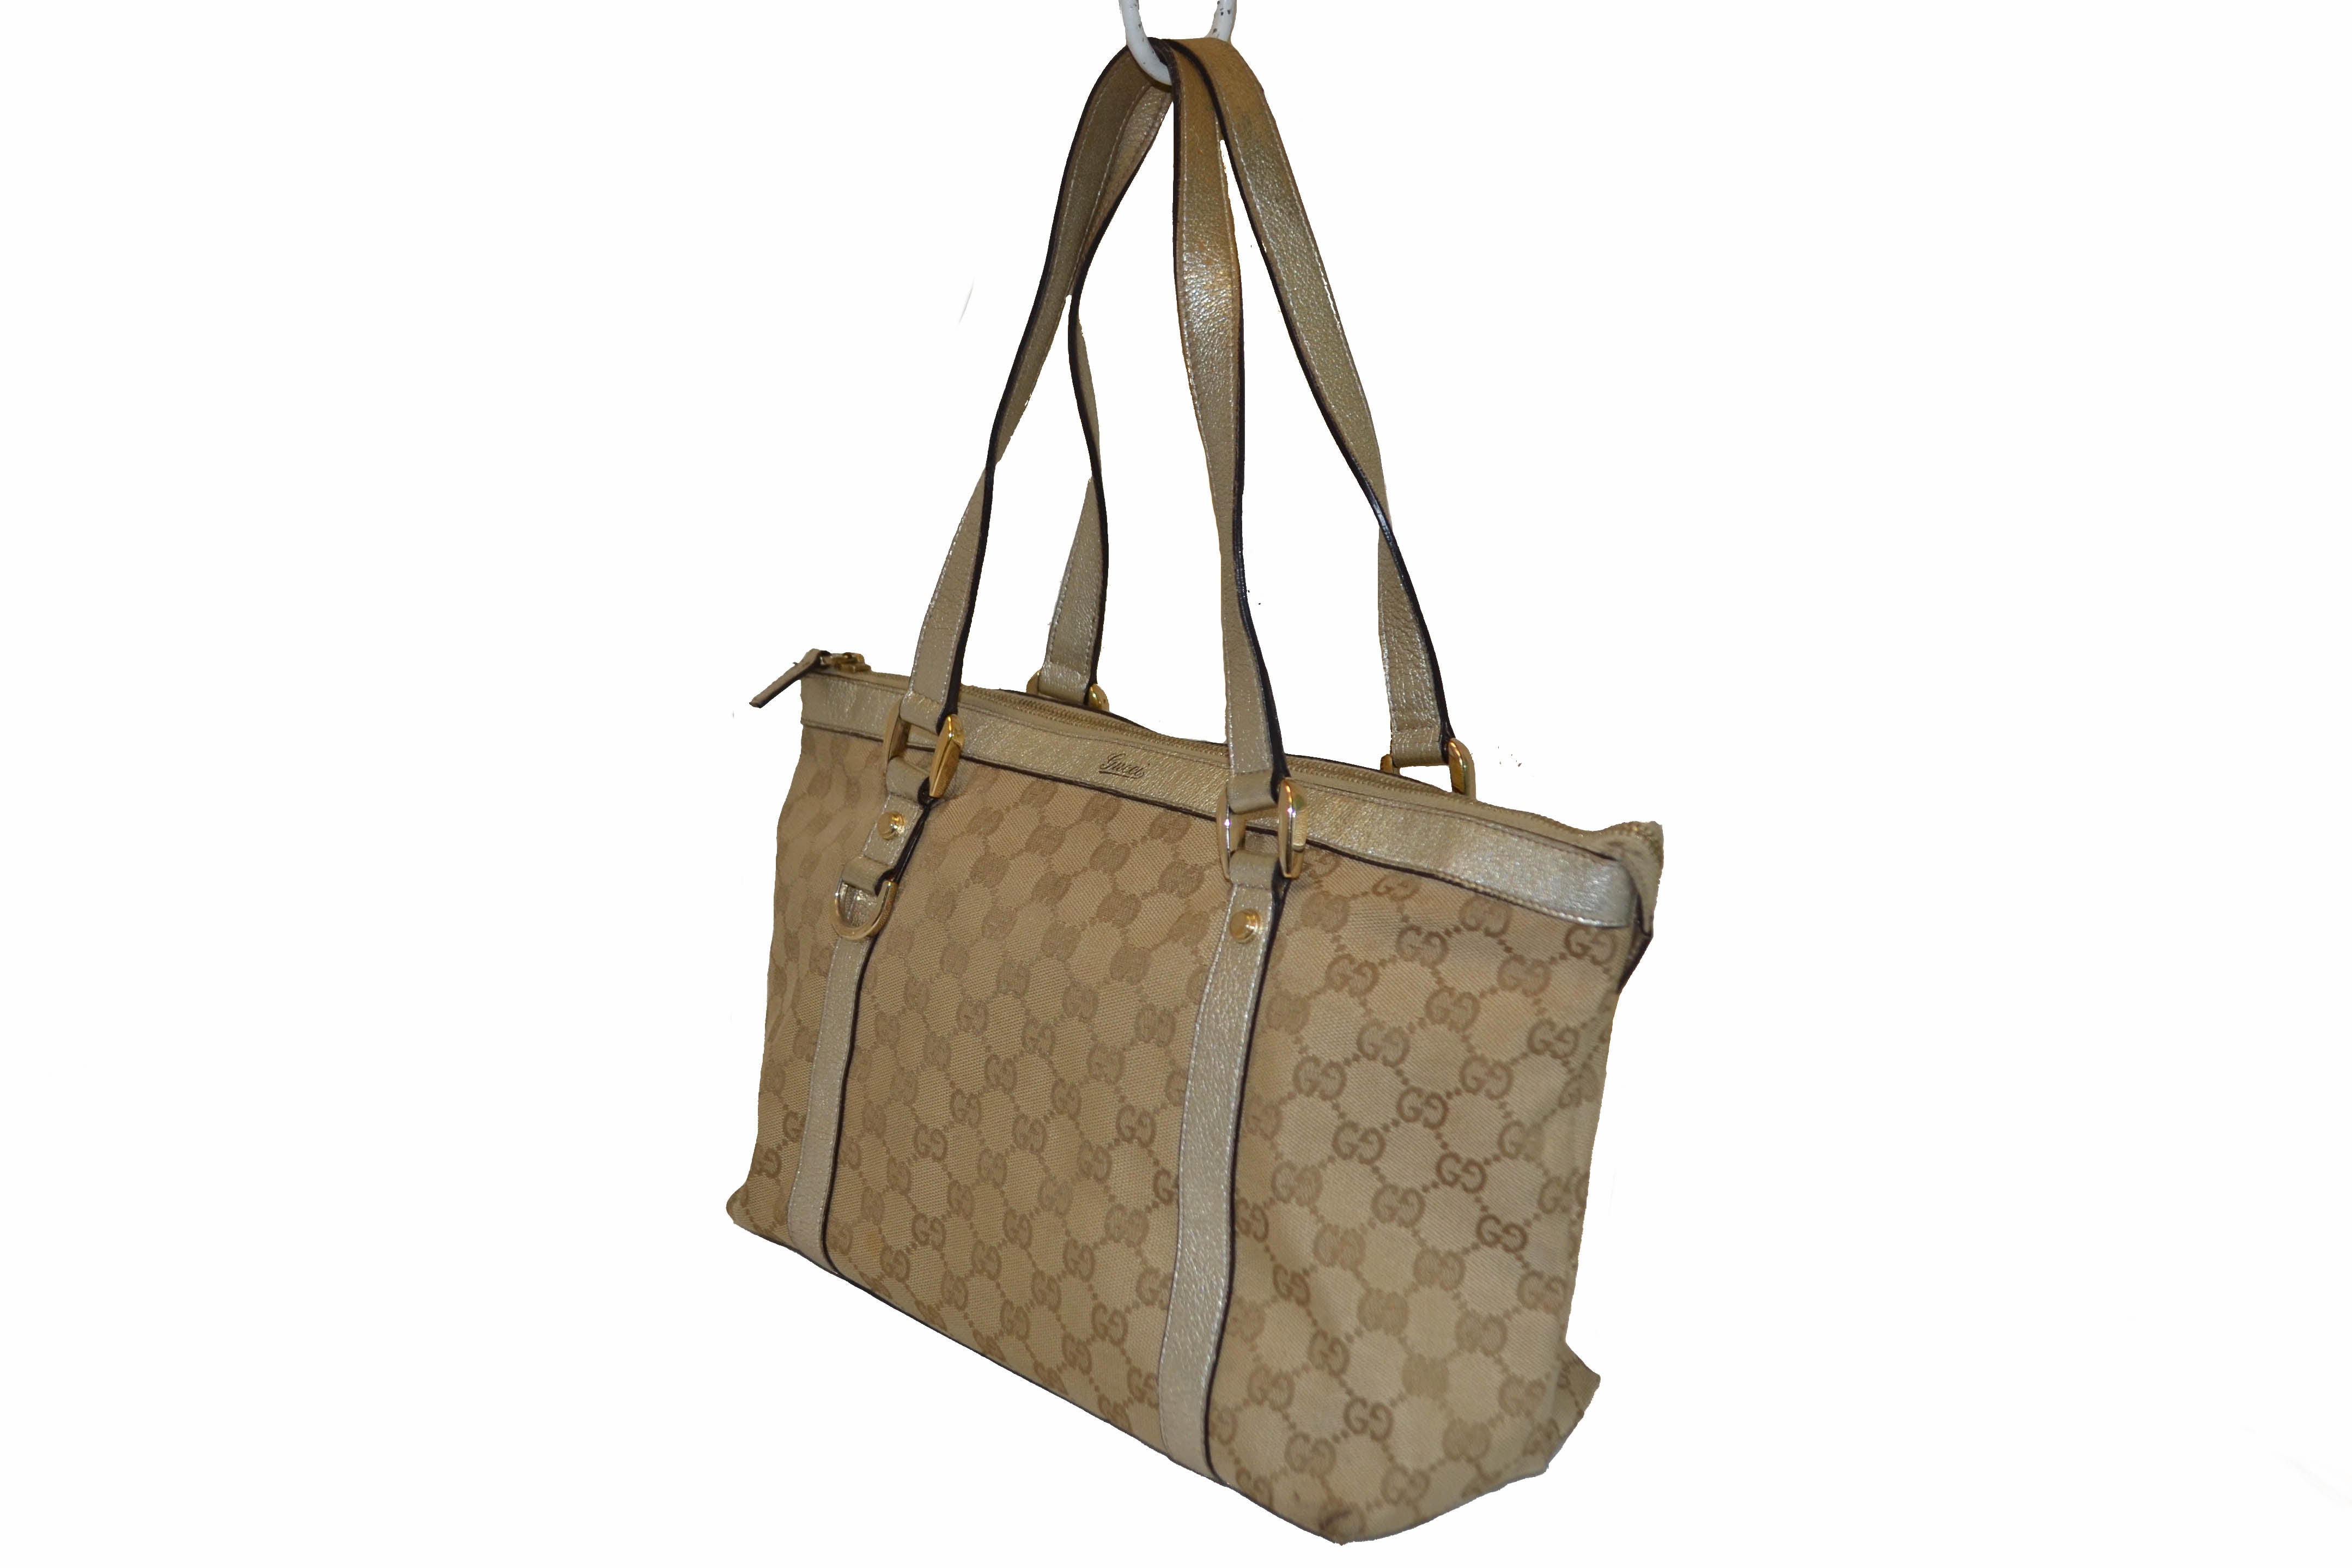 Authentic Gucci Metallic Gold Leather with Beige GG Monogram Canvas Small Tote Bag